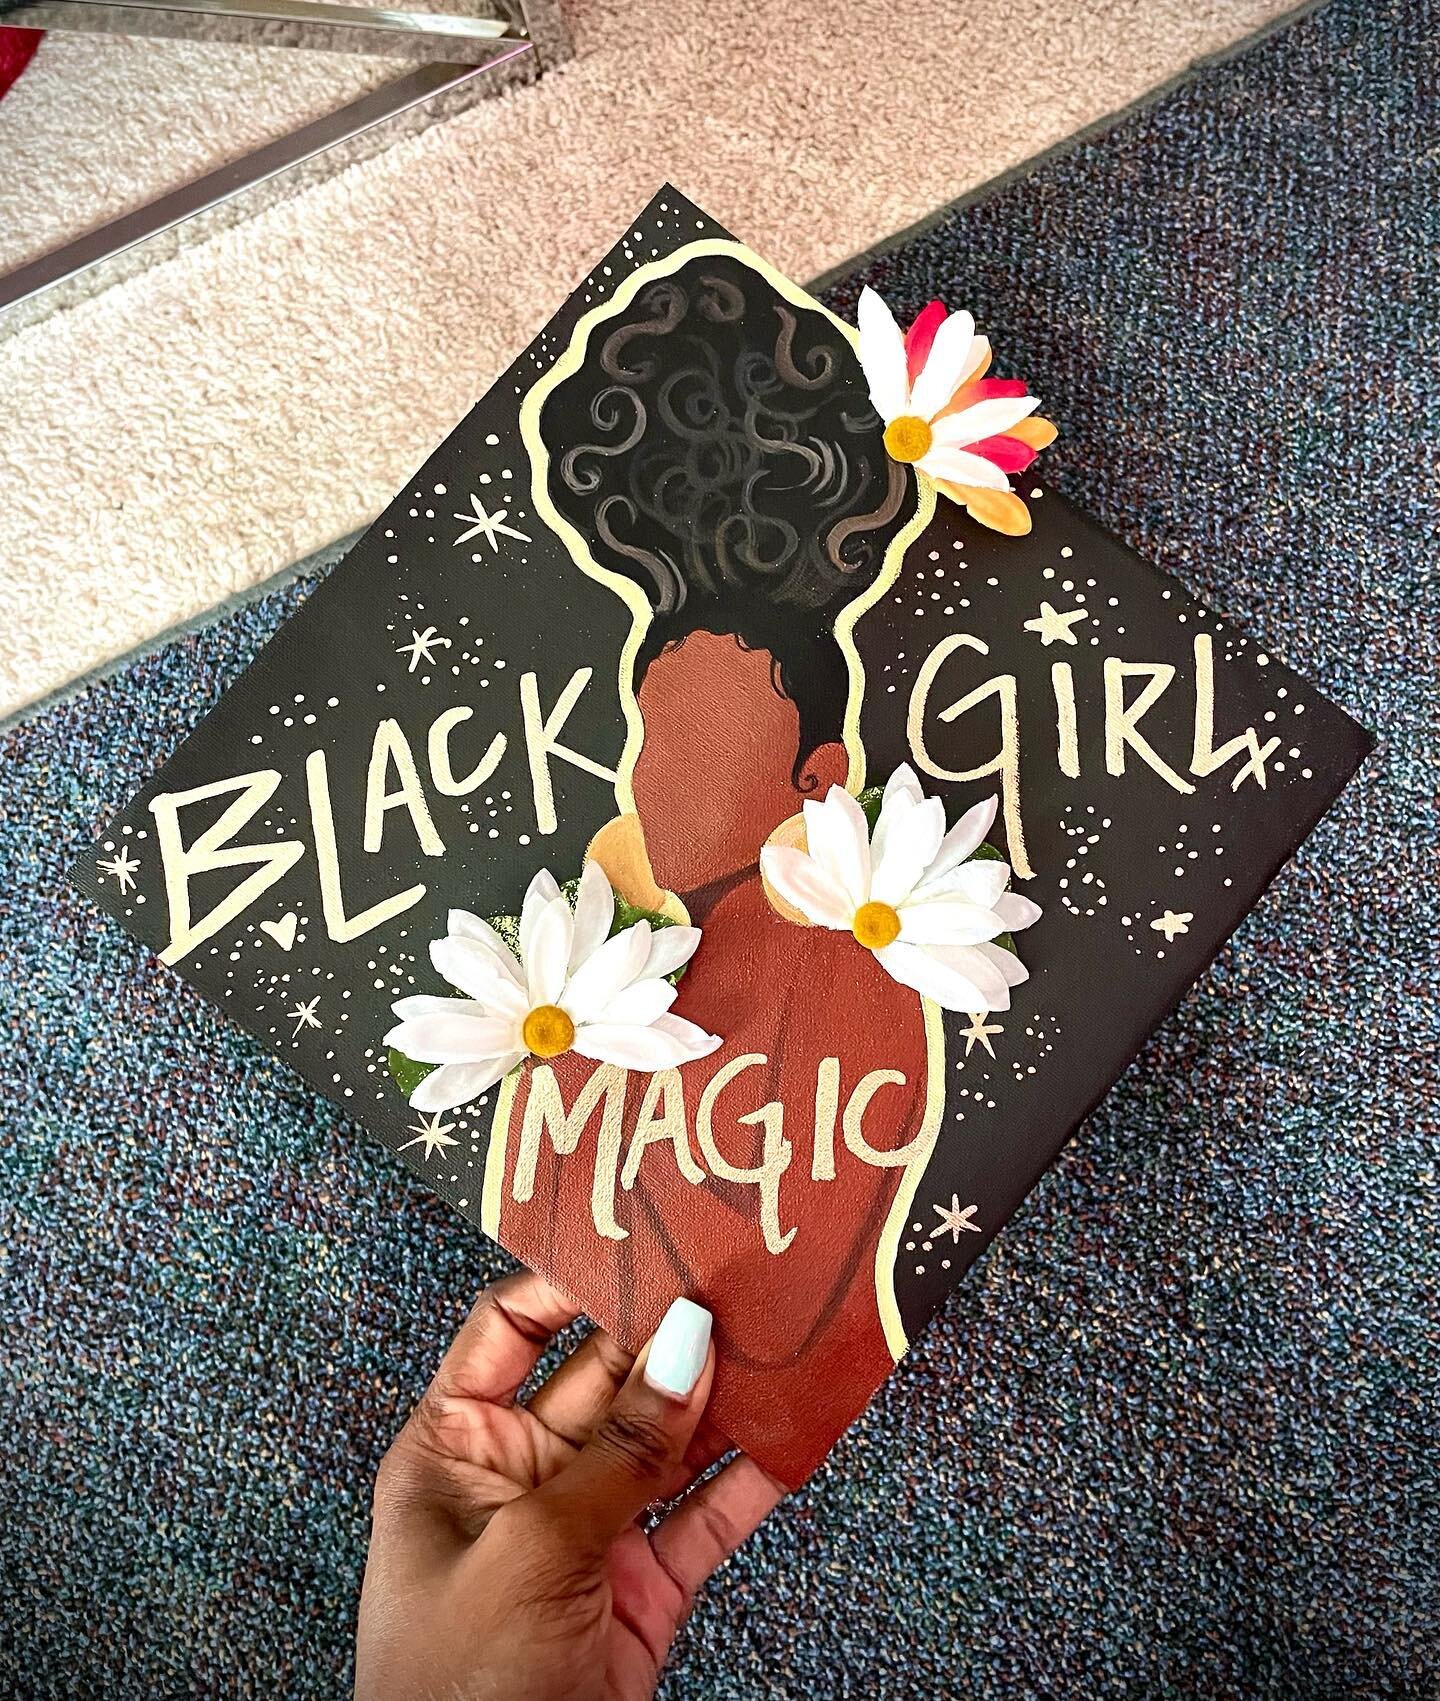 A sprinkle of black girl magic right in time for this college grad! This was super fun to create and also made me realize&hellip;
I graduated from A&amp;T almost 10 years ago 😭 where does the time go 🥲 #oldhead lol

#gradcap #graduation #usf #picas